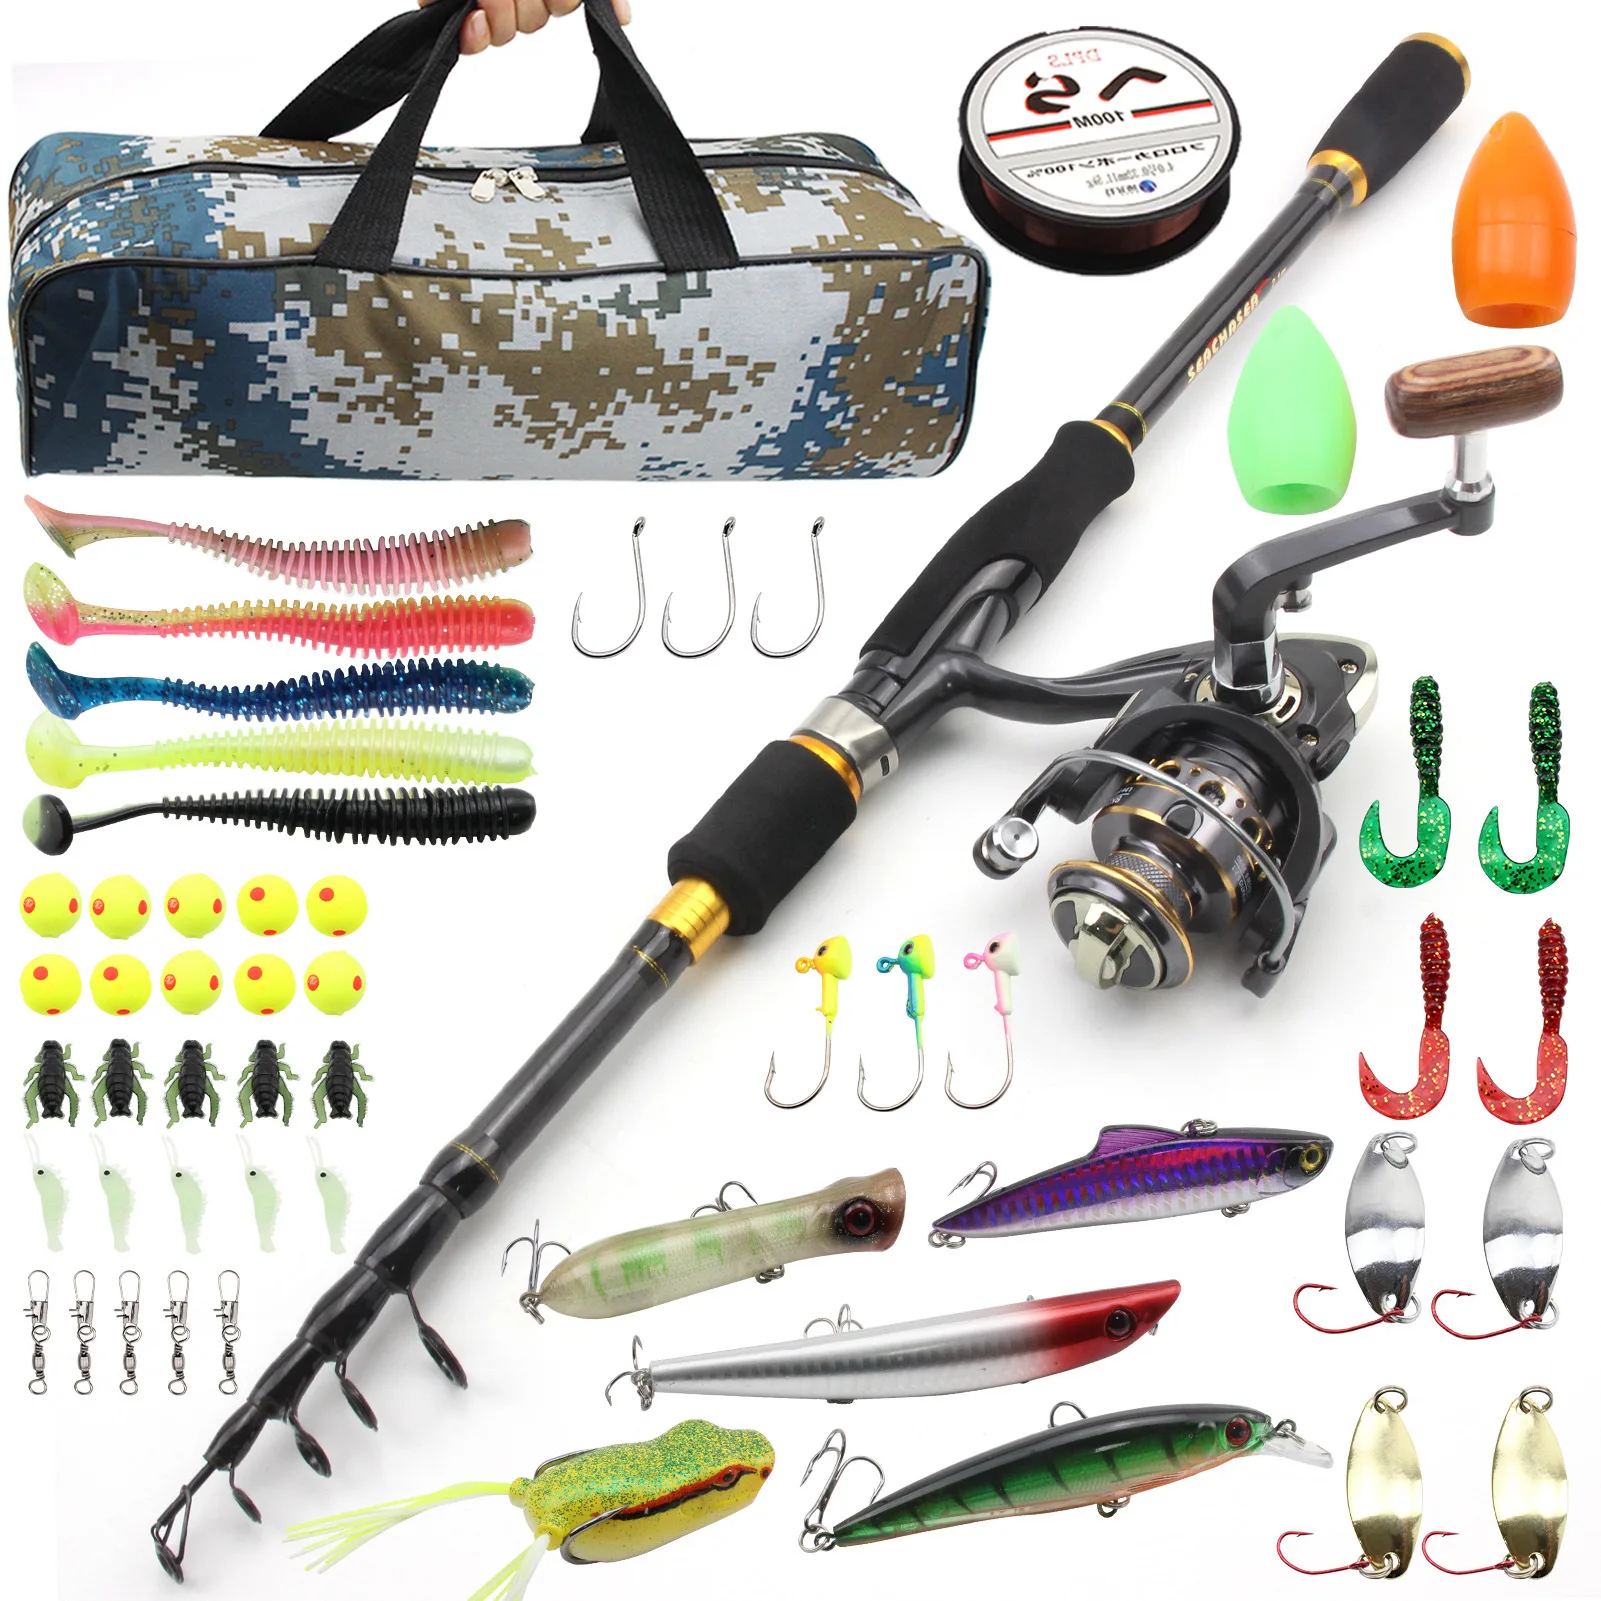 AOYA Fishing Rod and Reel Combo 1.8-2.7m Telescopic Carbon Fiber Ultralight Spinning Pole Lure Hooks Line Accessories Tackle Set